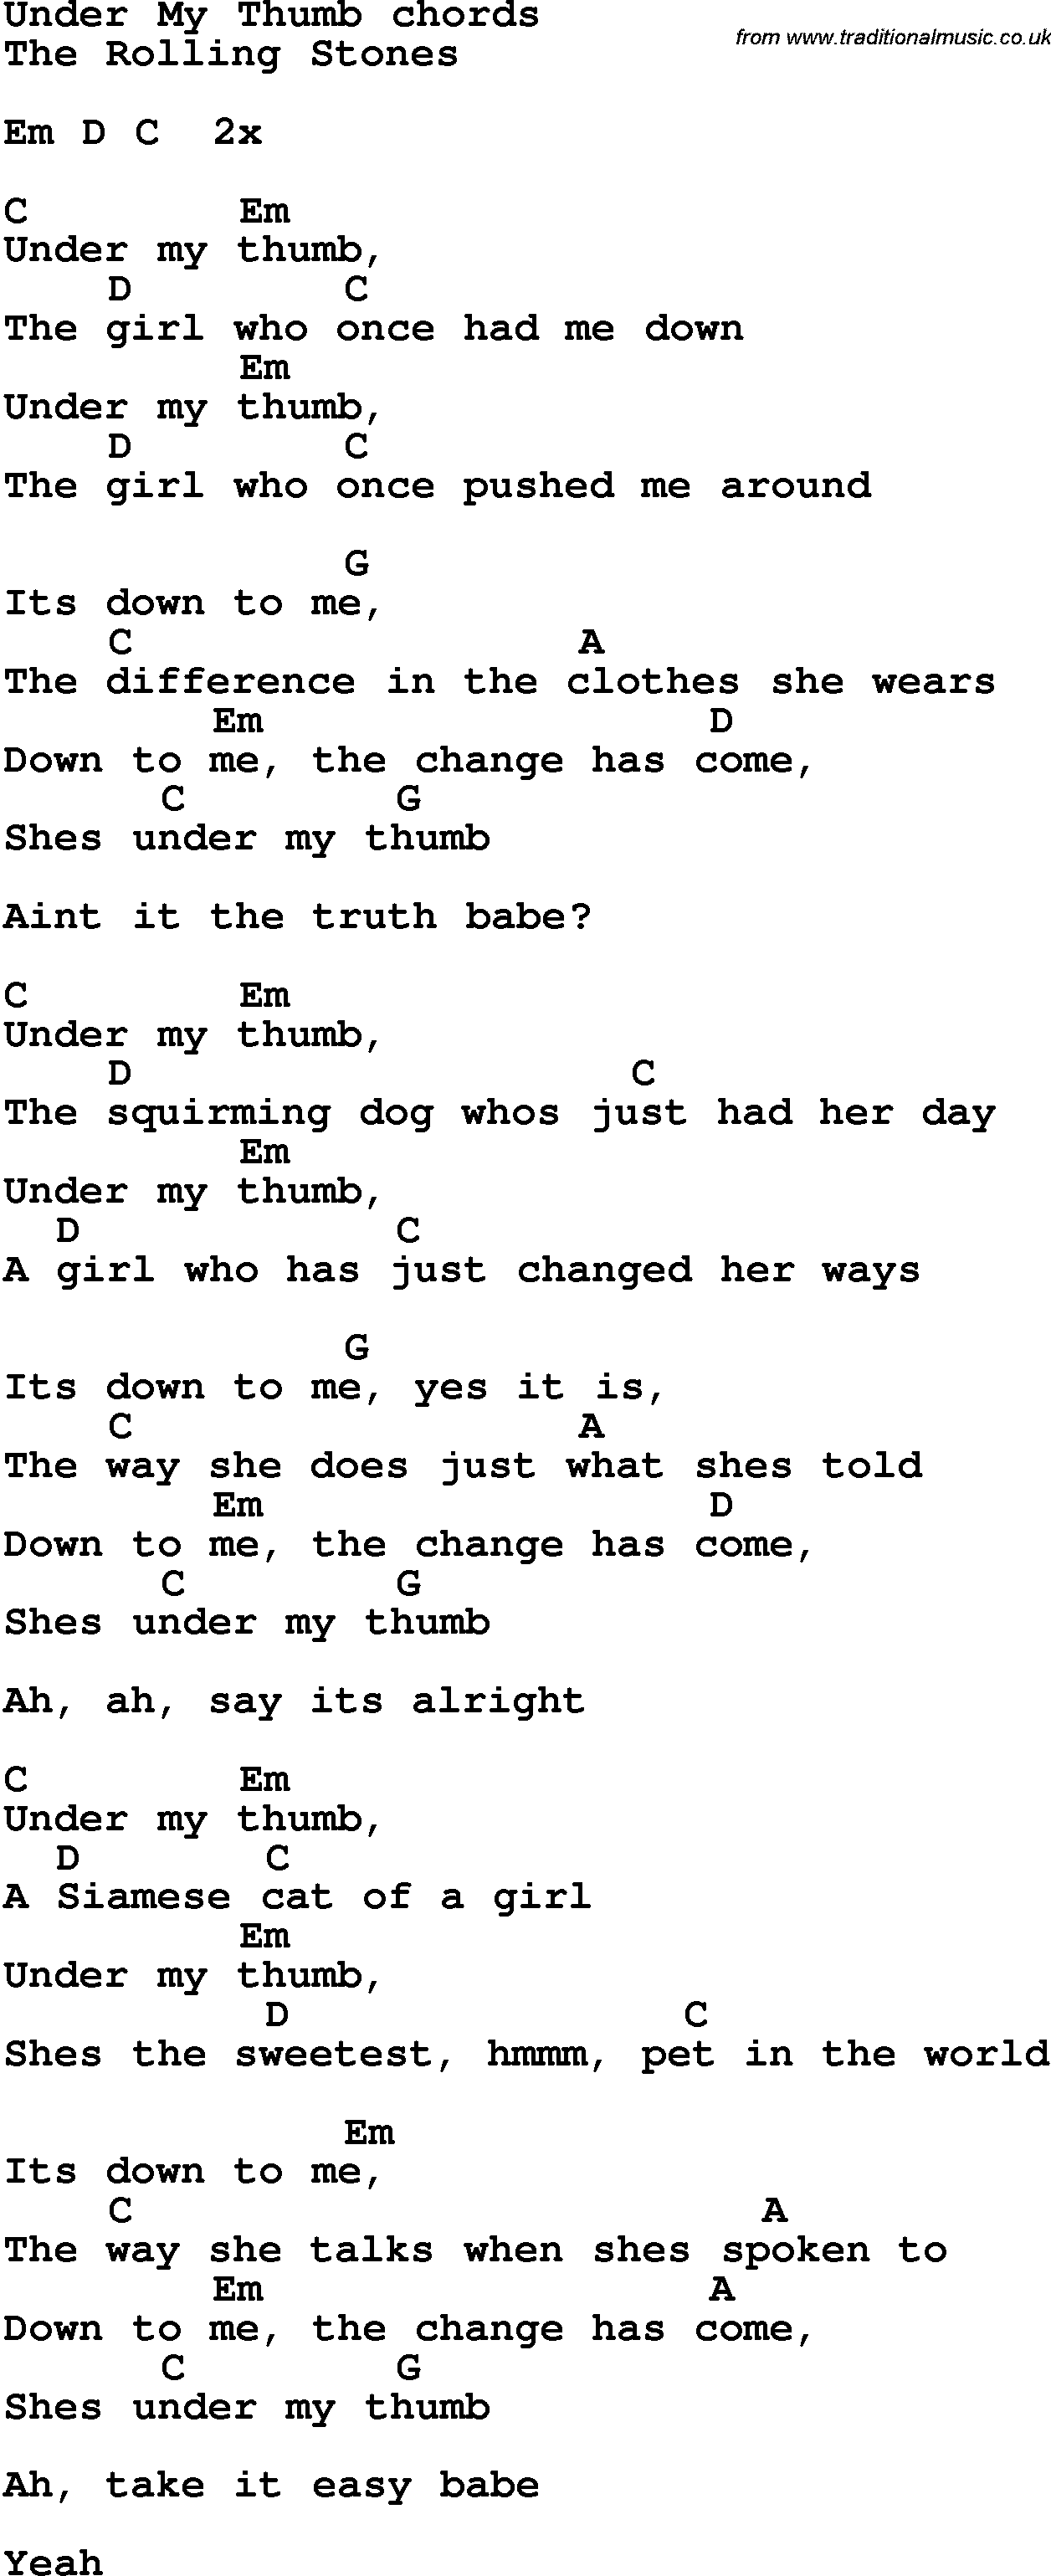 Song Lyrics with guitar chords for Under My Thumb